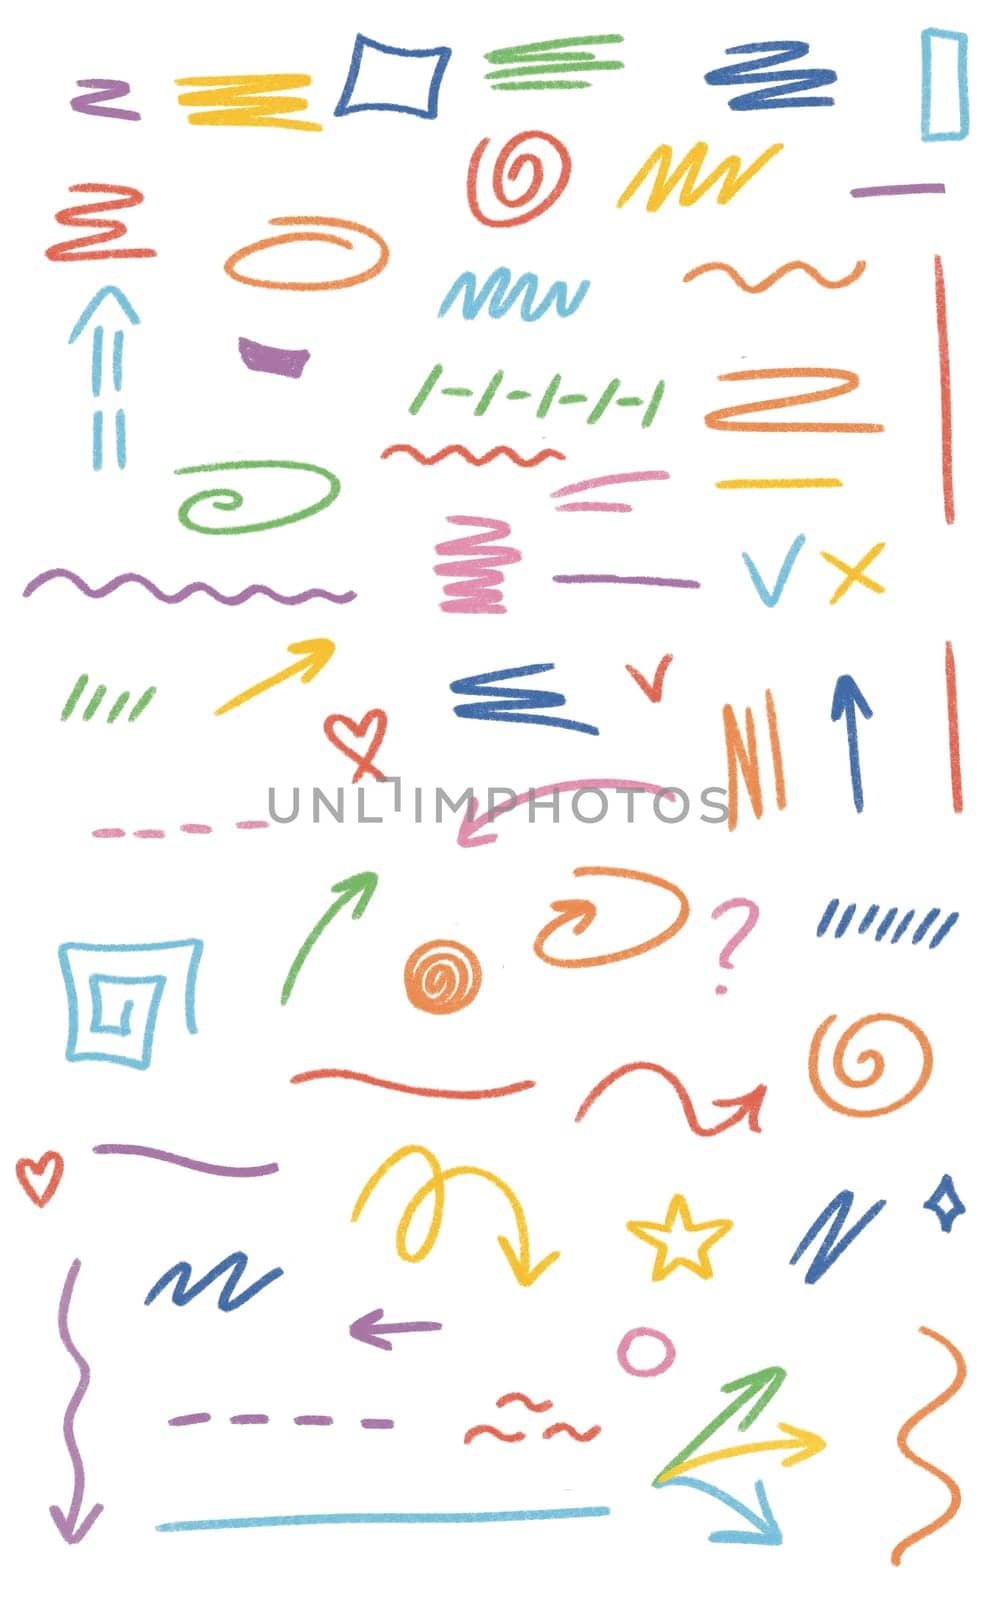 Do-it-yourself strokes with marker and pencil. Marker lines, pencil stripes, highlighting elements, illustrations of permanent markers in the form of checkmarks, hearts, arrows in different directions. Attractive visual effects for graphic design, art supplies, stationery. High quality illustration